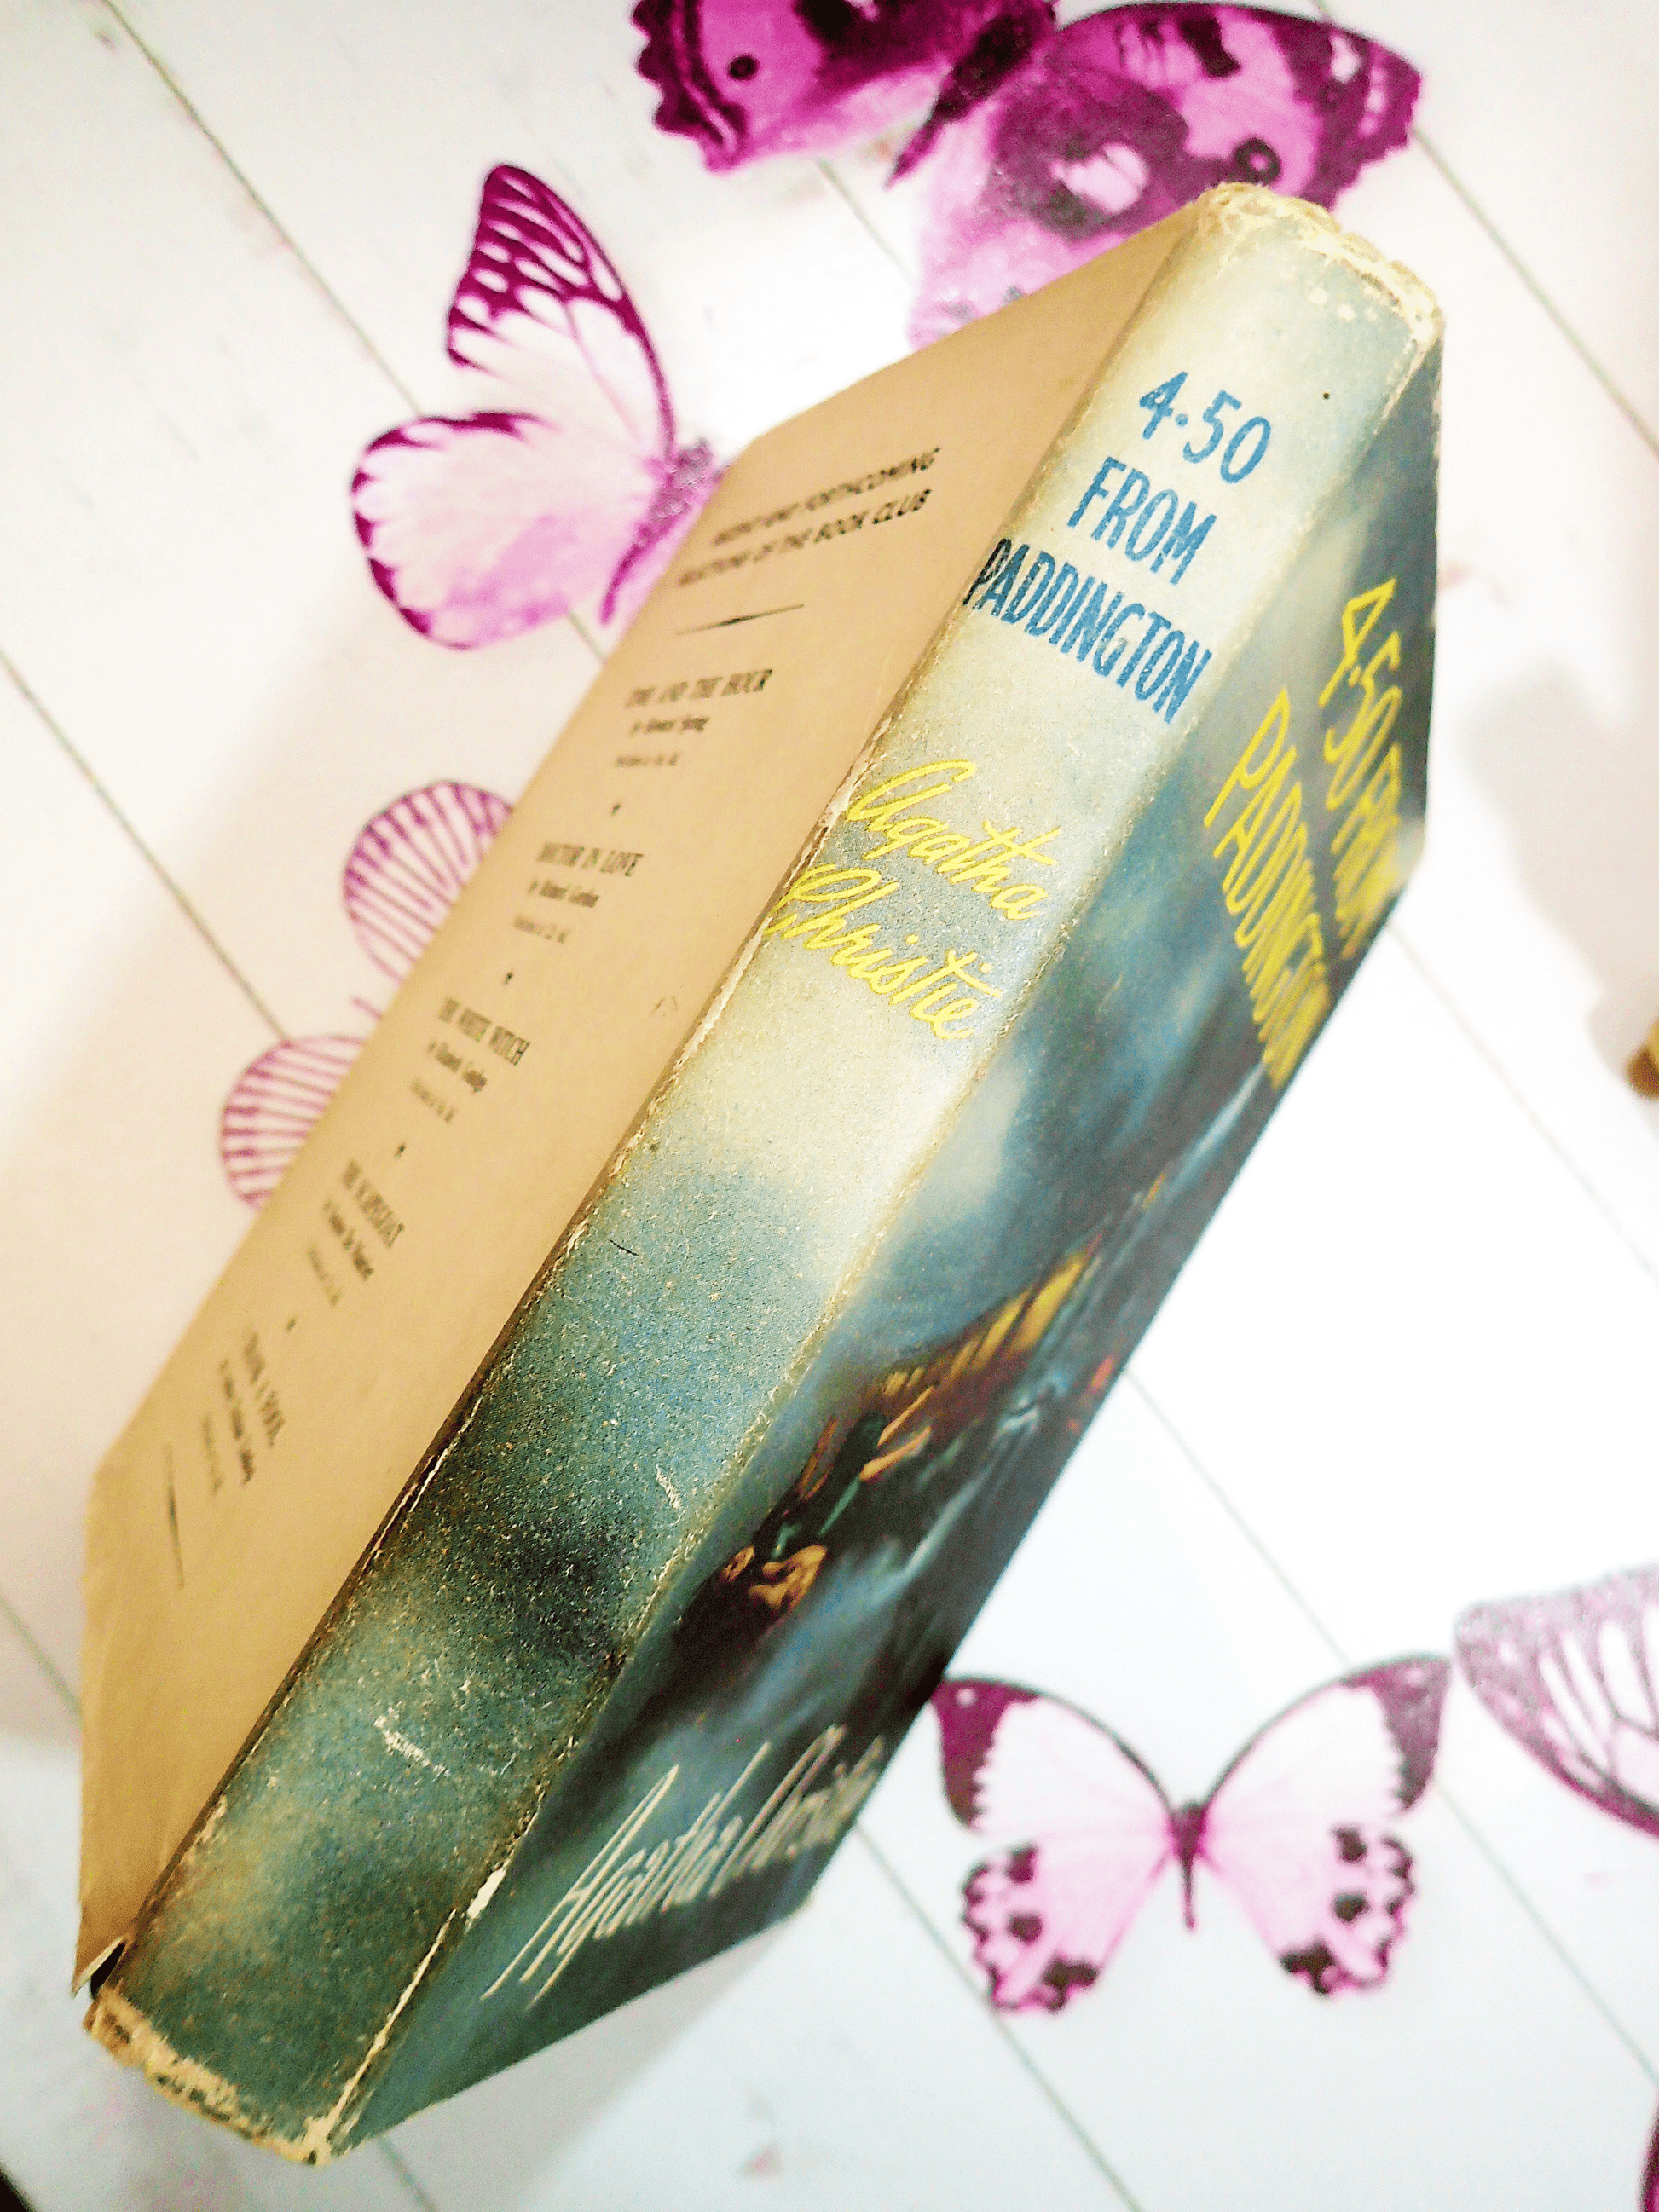 Agatha Christie 4.50 from Paddington Classic Vintage Crime Fiction book showing Blue and Yellow titles on the spine. 